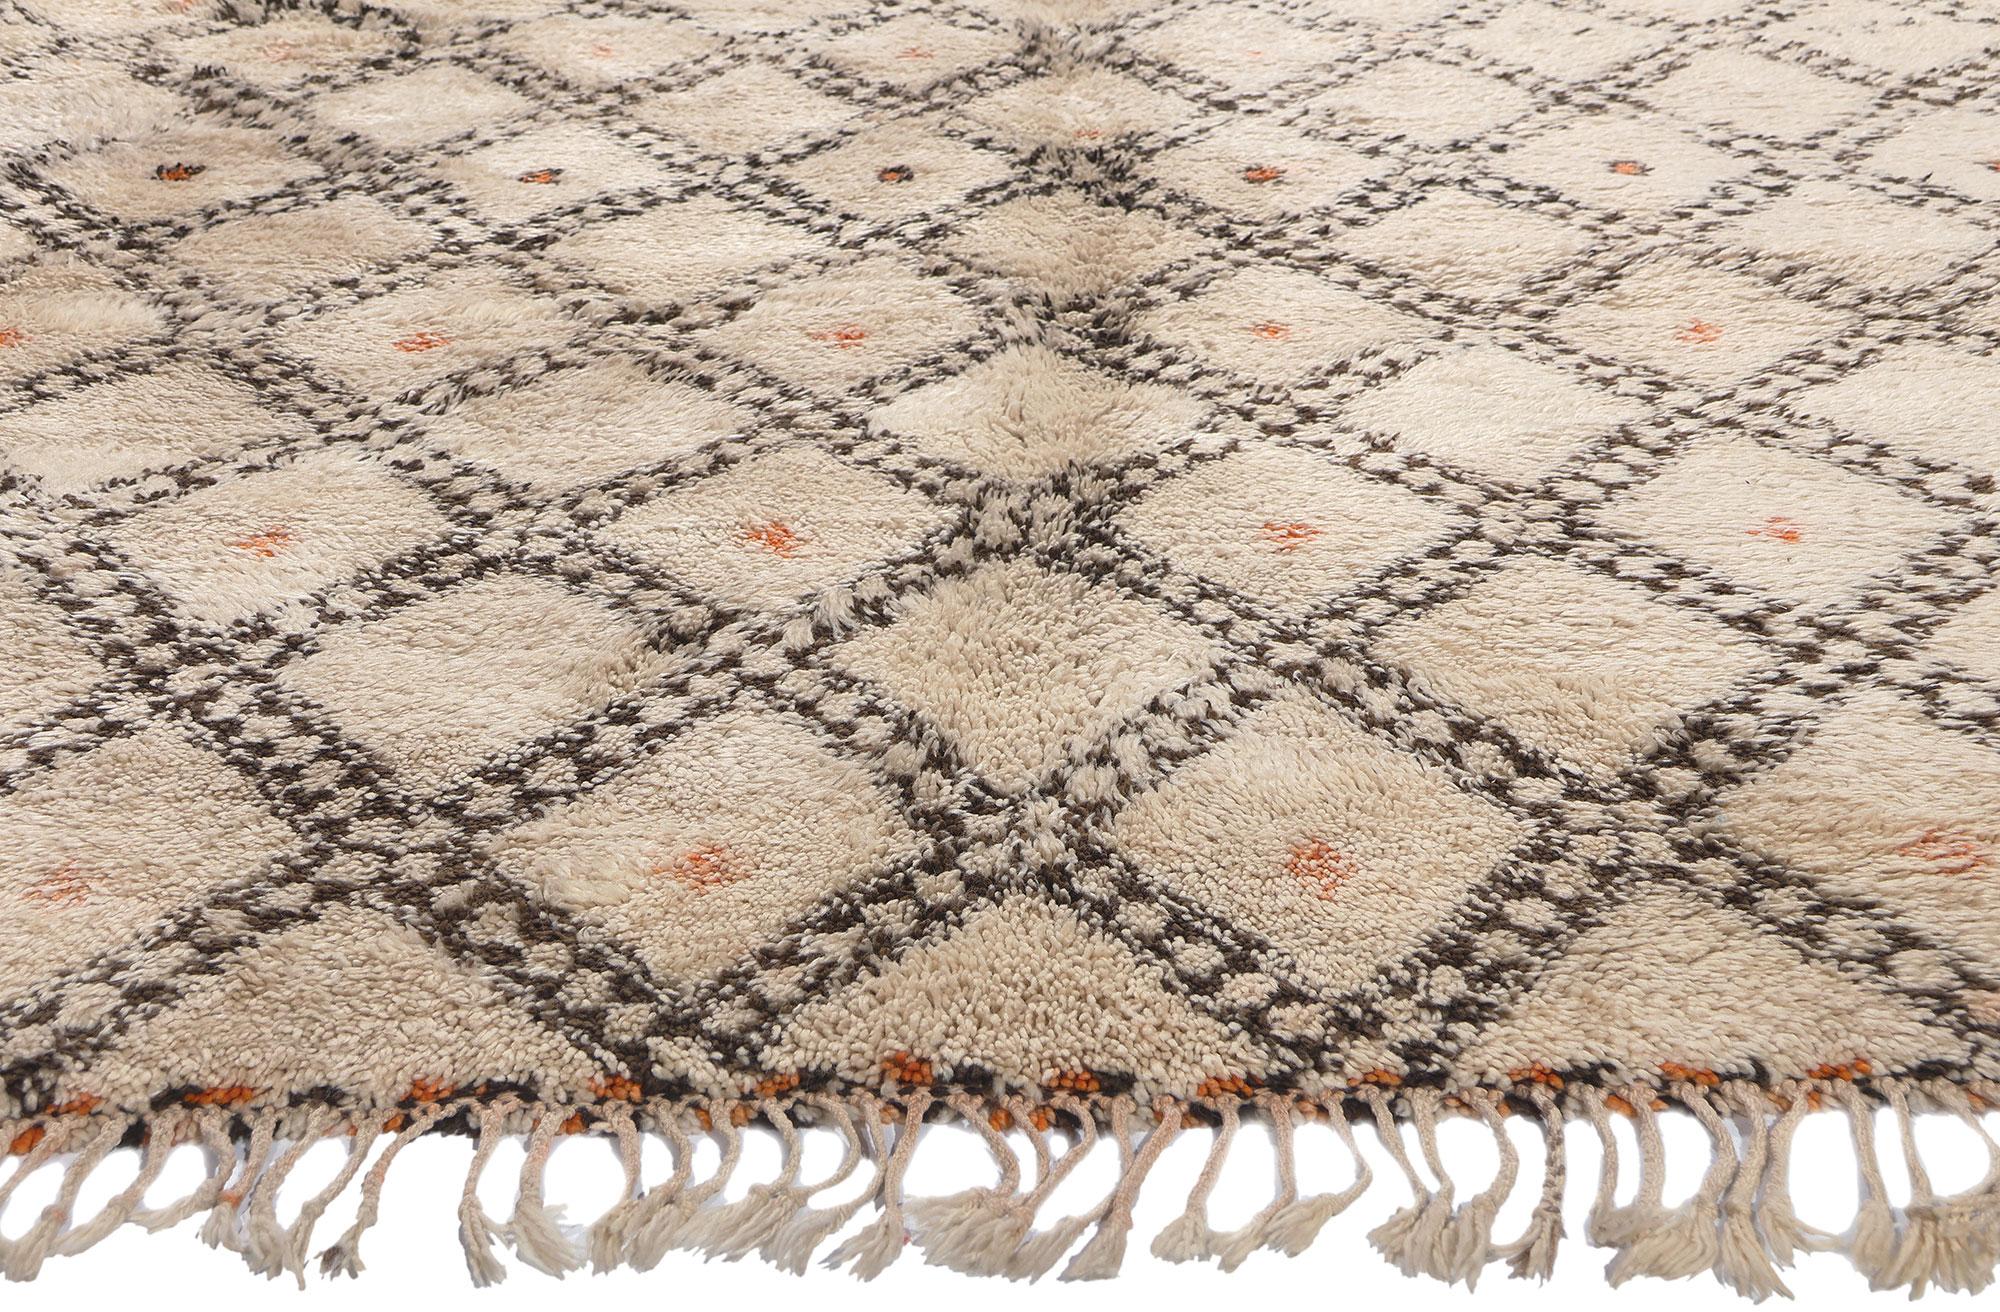 Hand-Knotted Vintage Beni Ourain Moroccan Rug, Cozy Nomad Meets Midcentury Modern For Sale